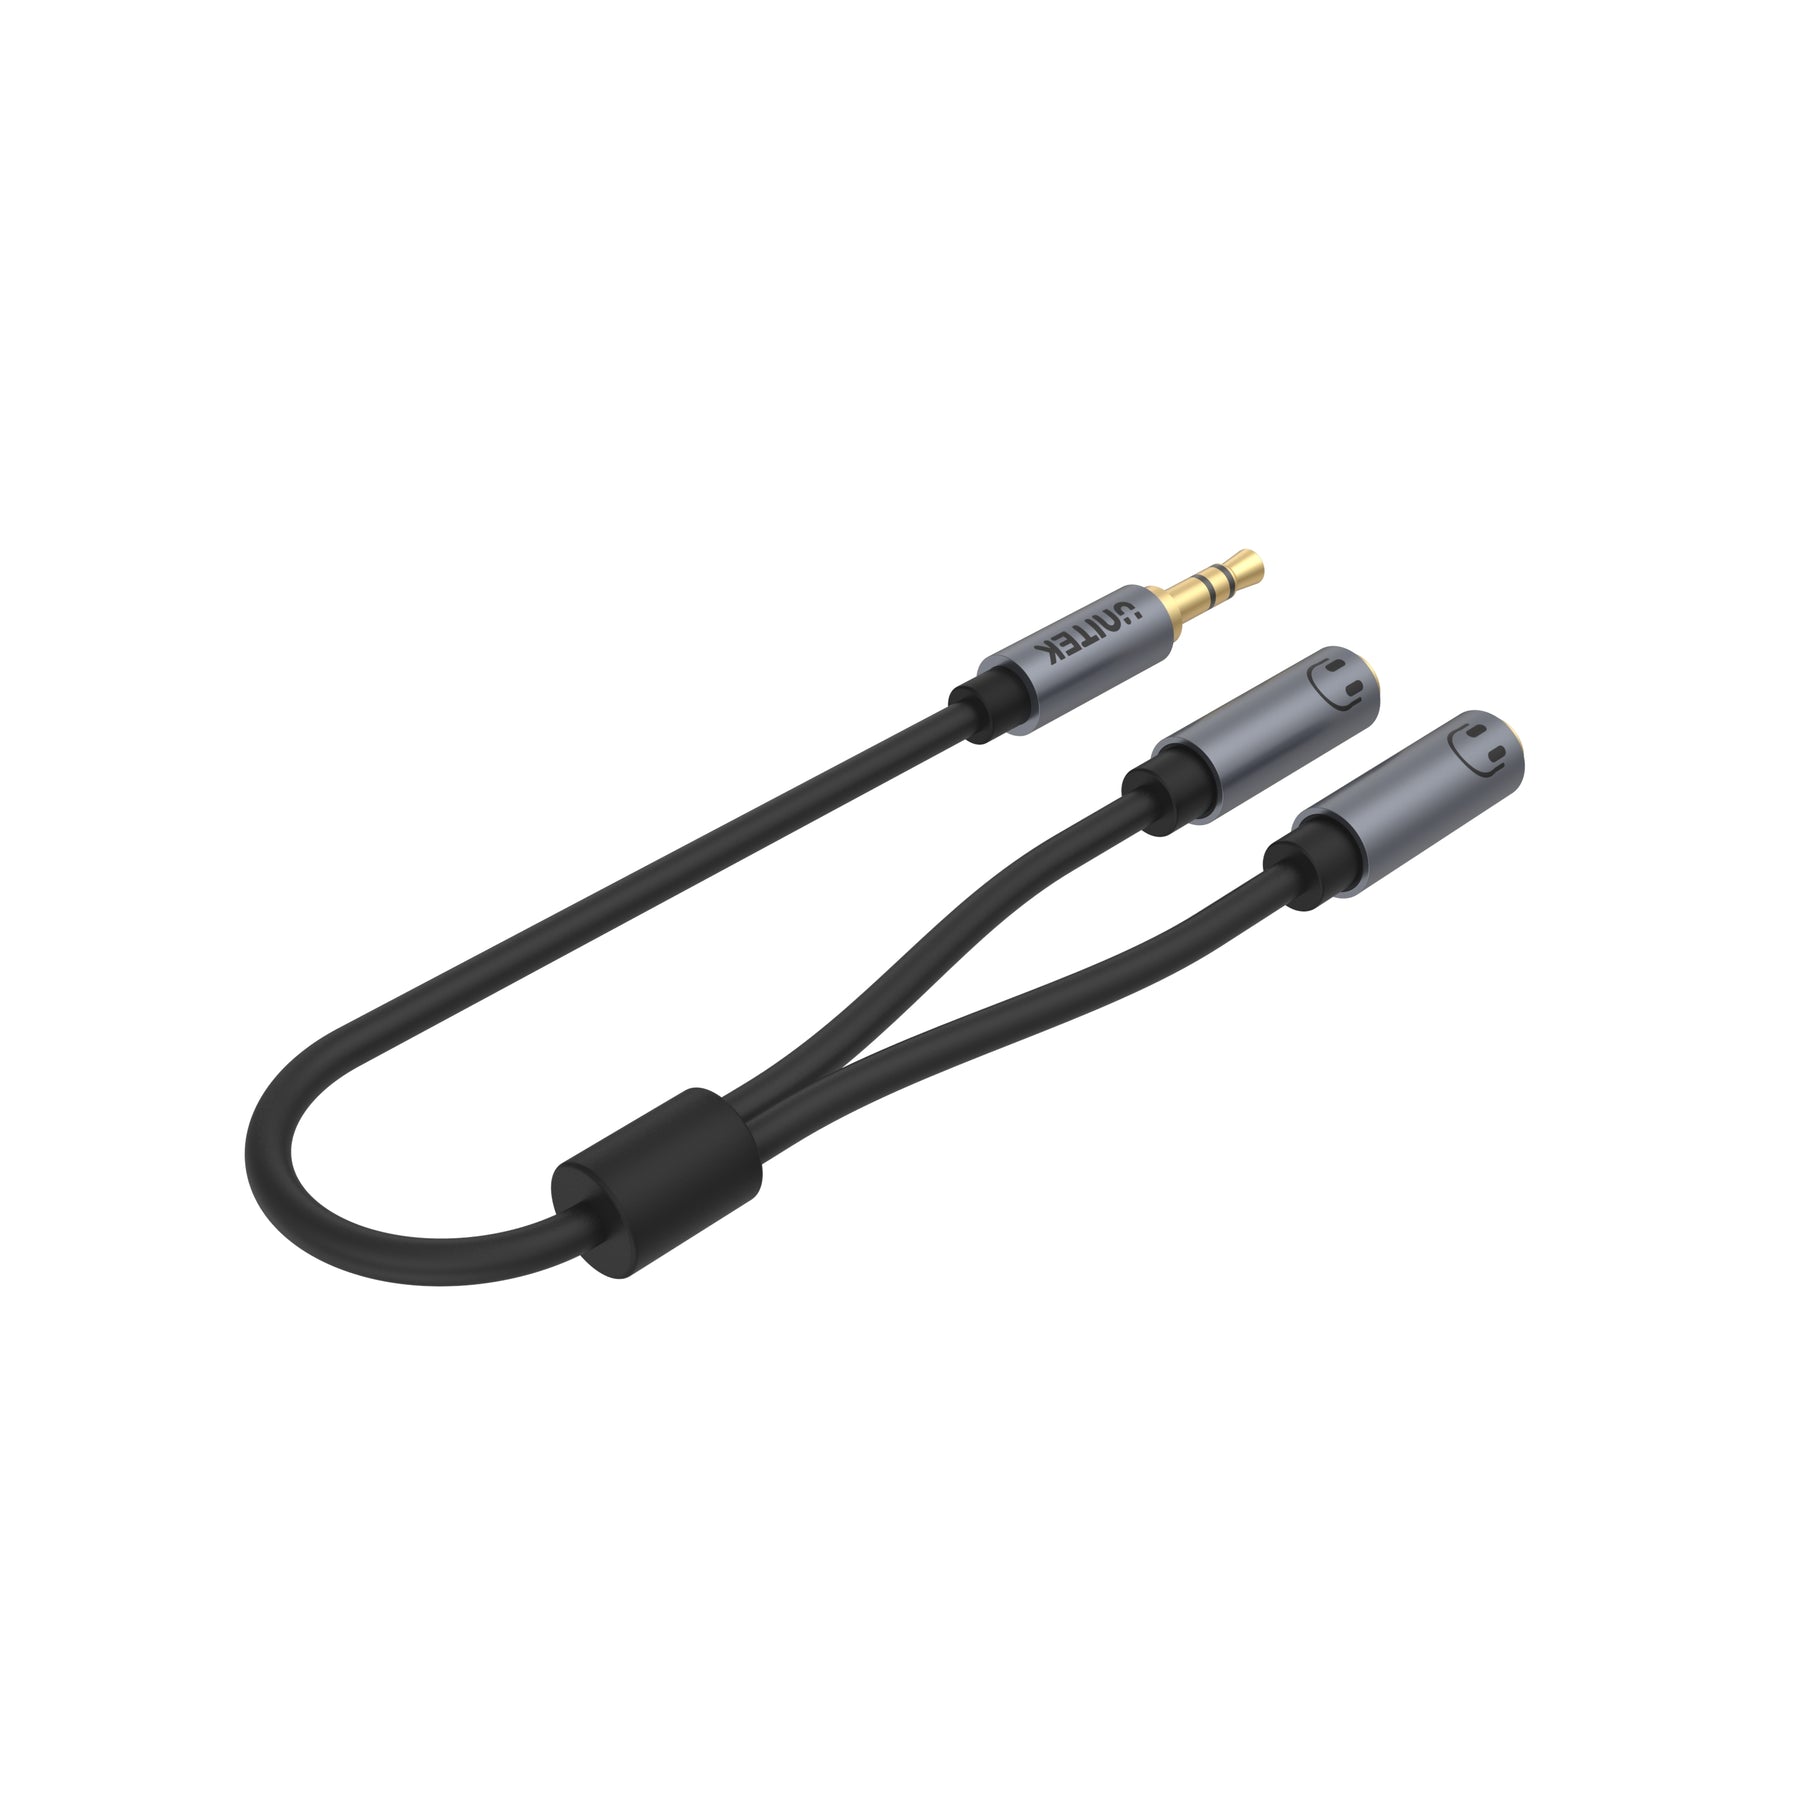 Headphone Splitter For Dual Headphone (3.5mm Plug to Dual 3.5mm Jack) Stereo Audio Cable